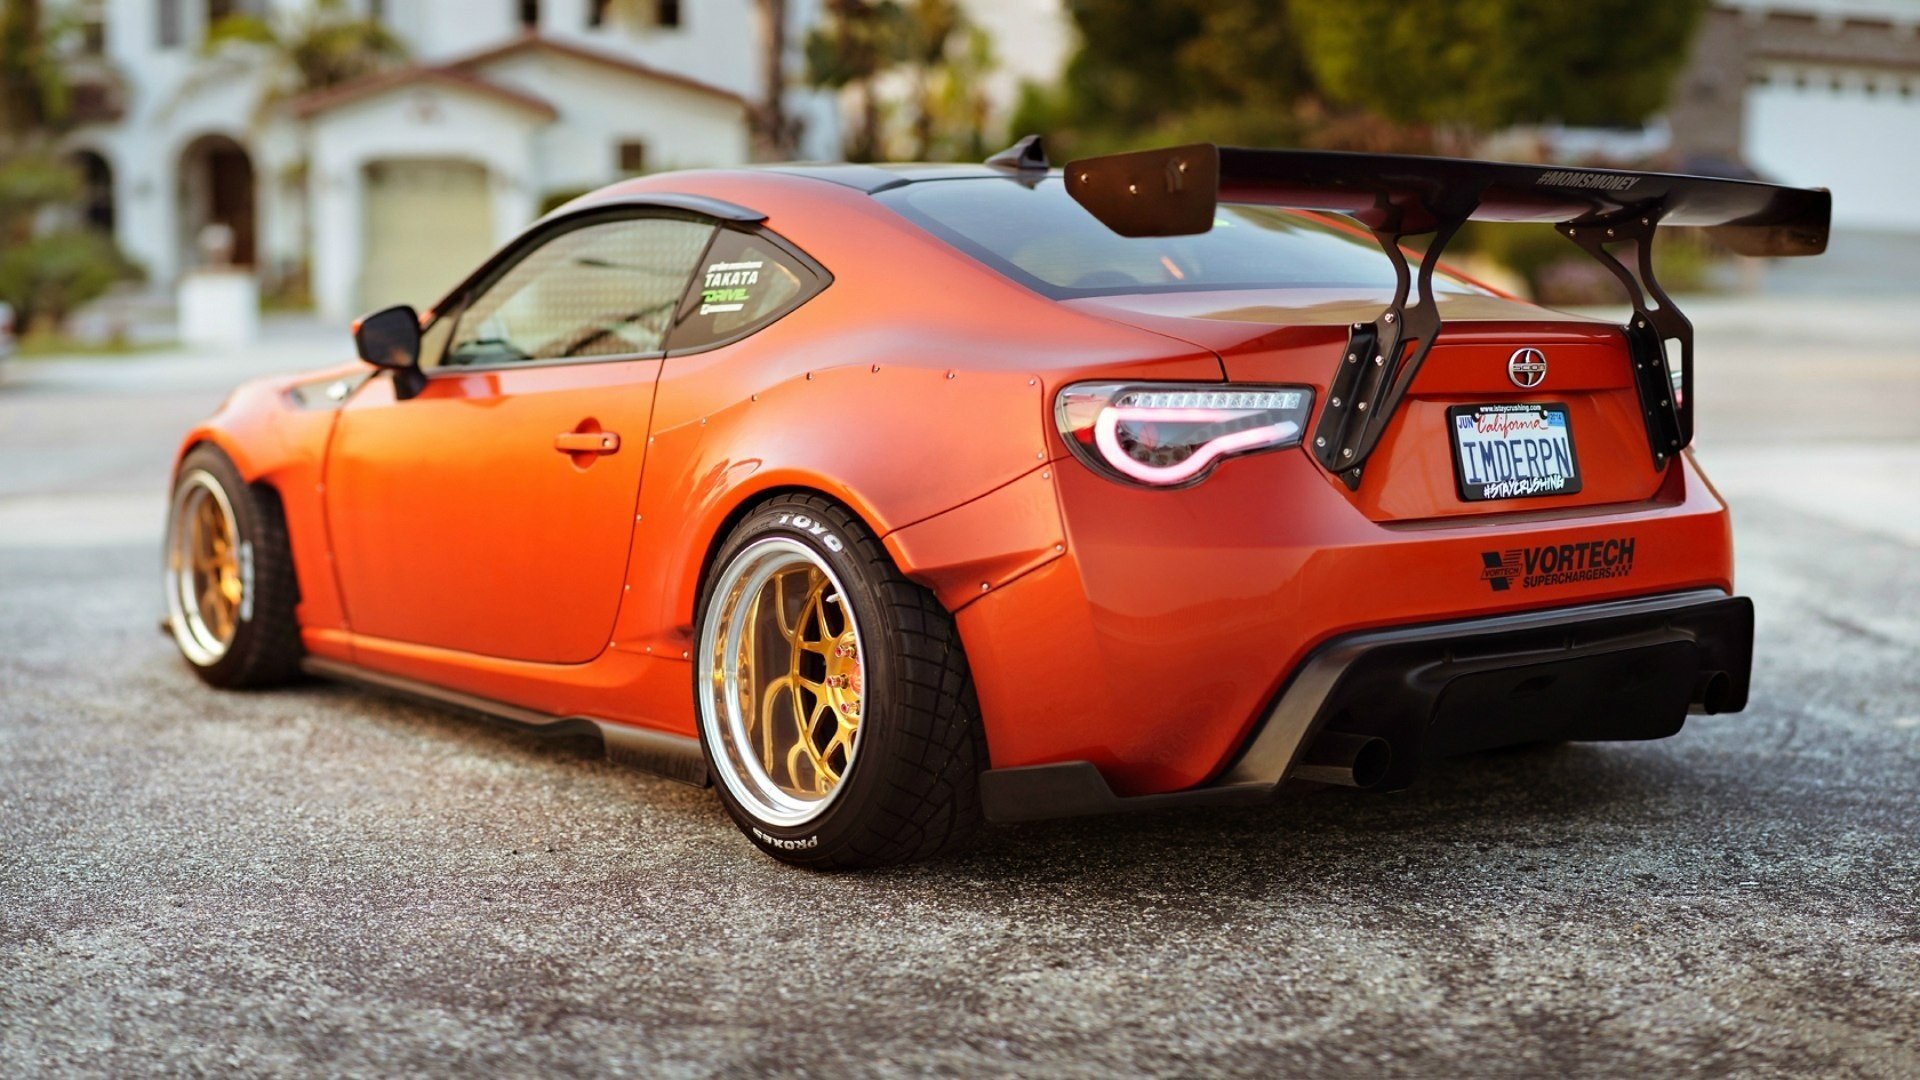 toyota gt86, Scion frs, Subaru brz, Coupe, Tuning, Cars, Japan Wallpaper